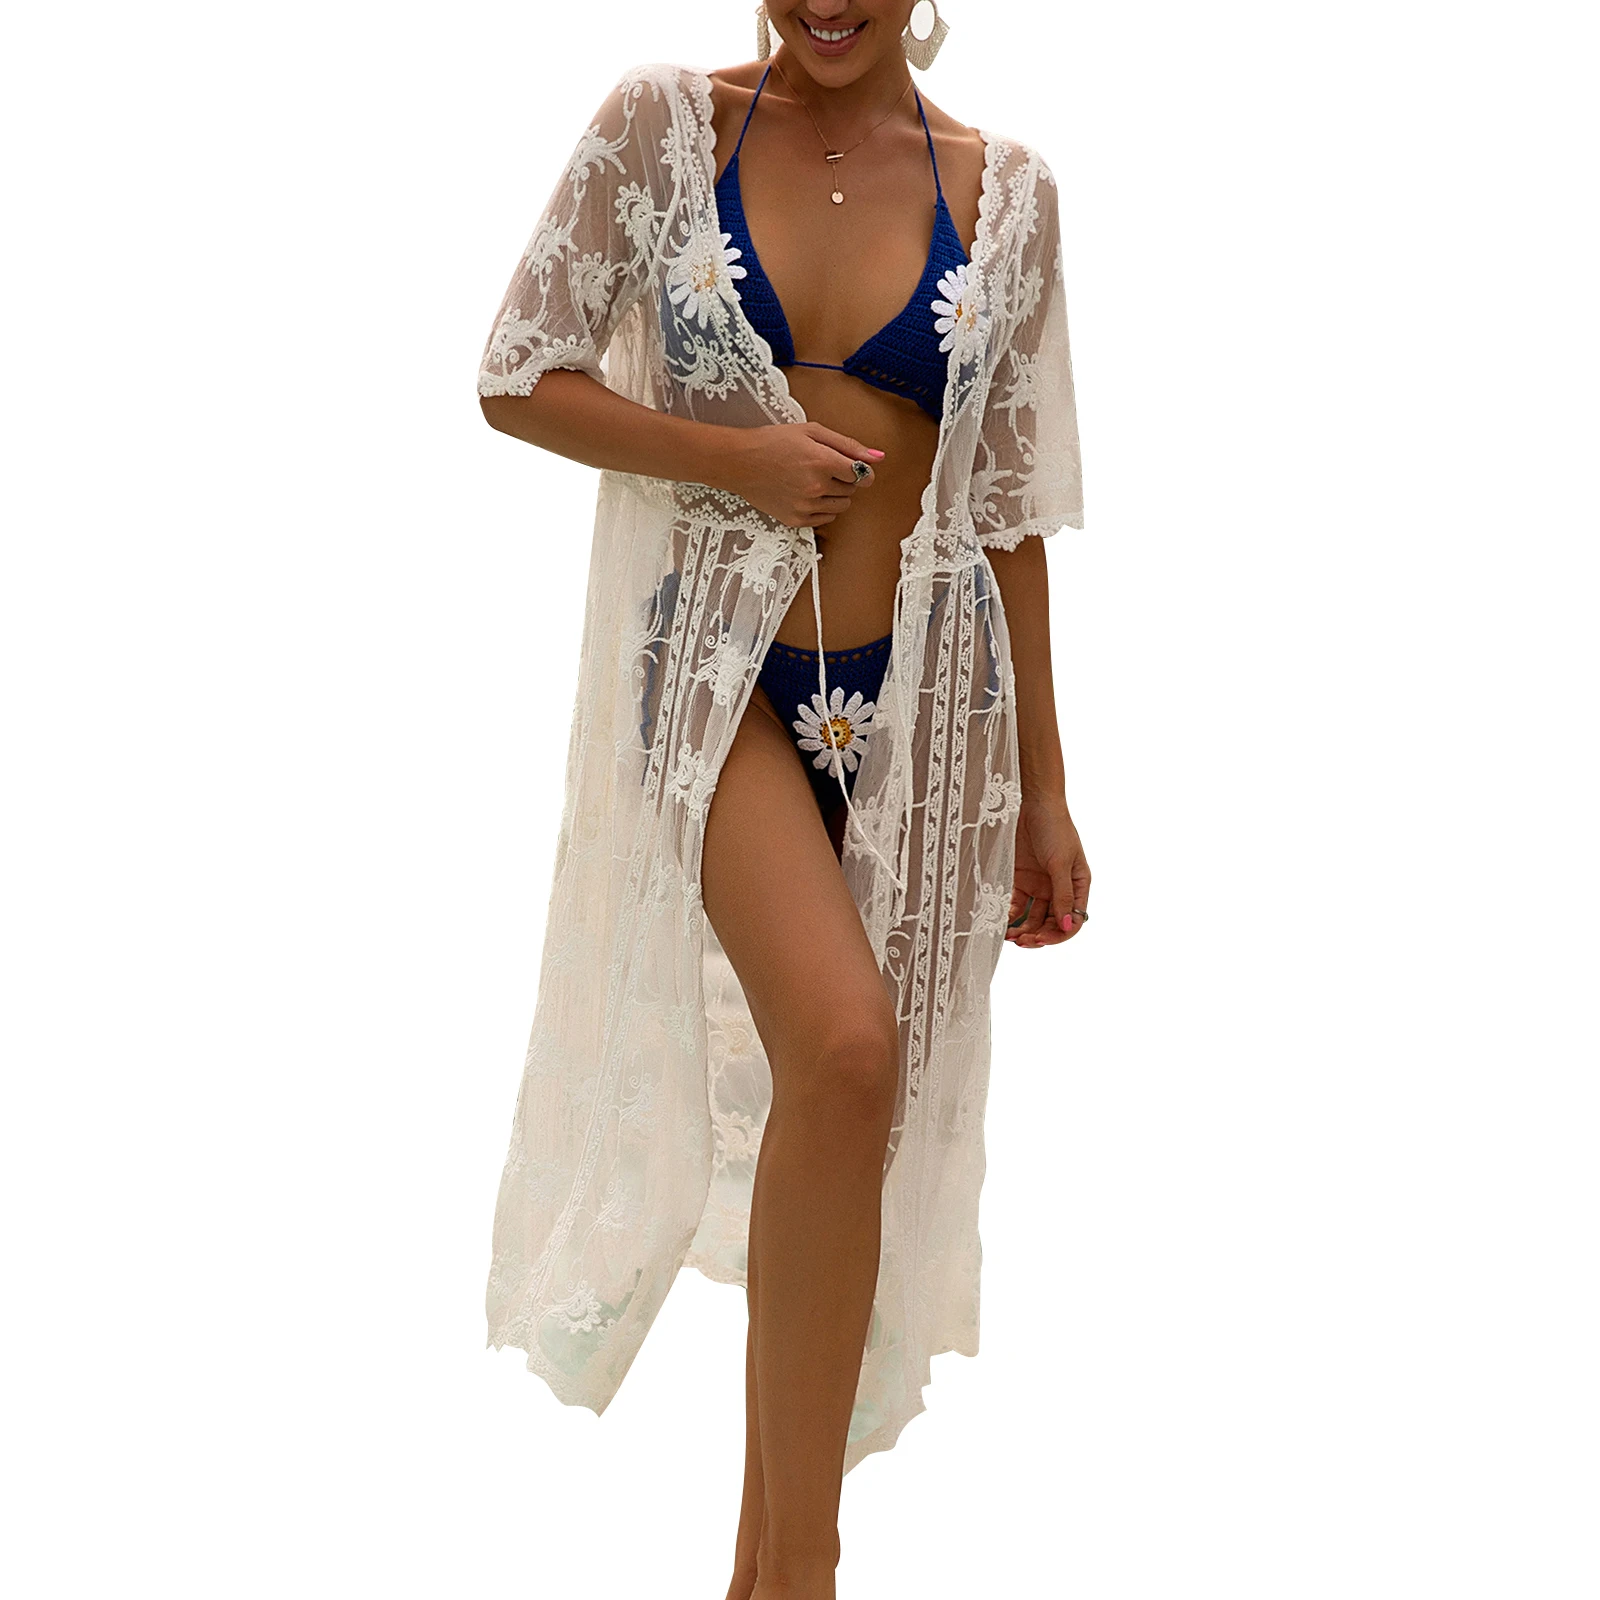 Female Bikini Cover Ups Lace Floral Deep V-Neck Short Sleeve Hollow Out Beach Dress Smock Coat for Women Swimwears Beach Robe Cover Up